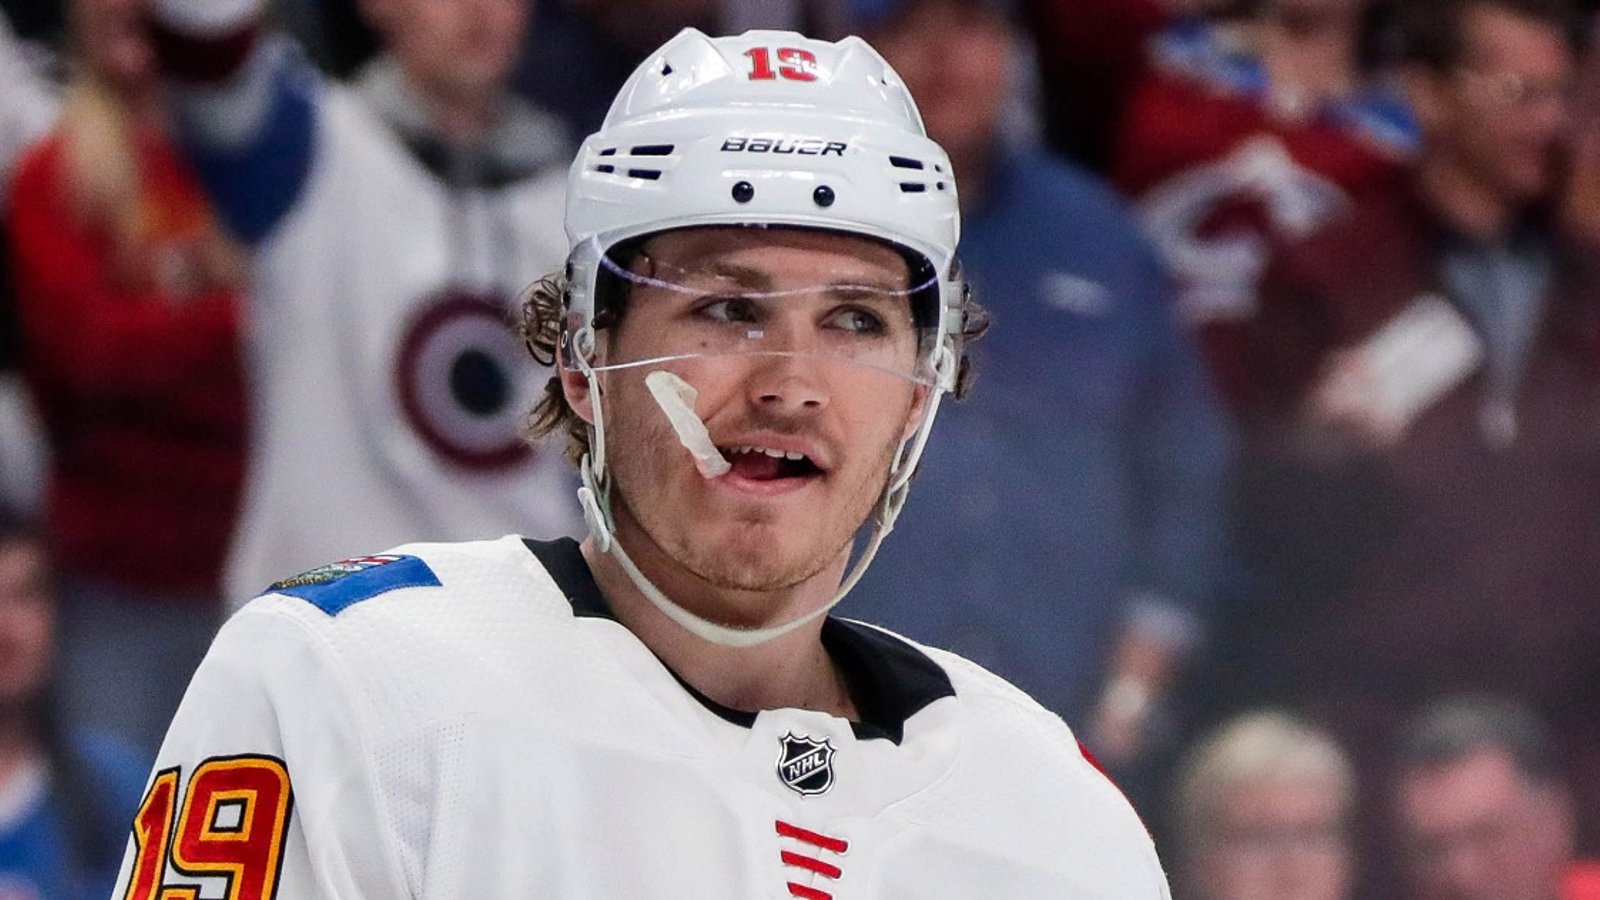 Former NHL players believe the accusations against Tkachuk are “bullshit.”